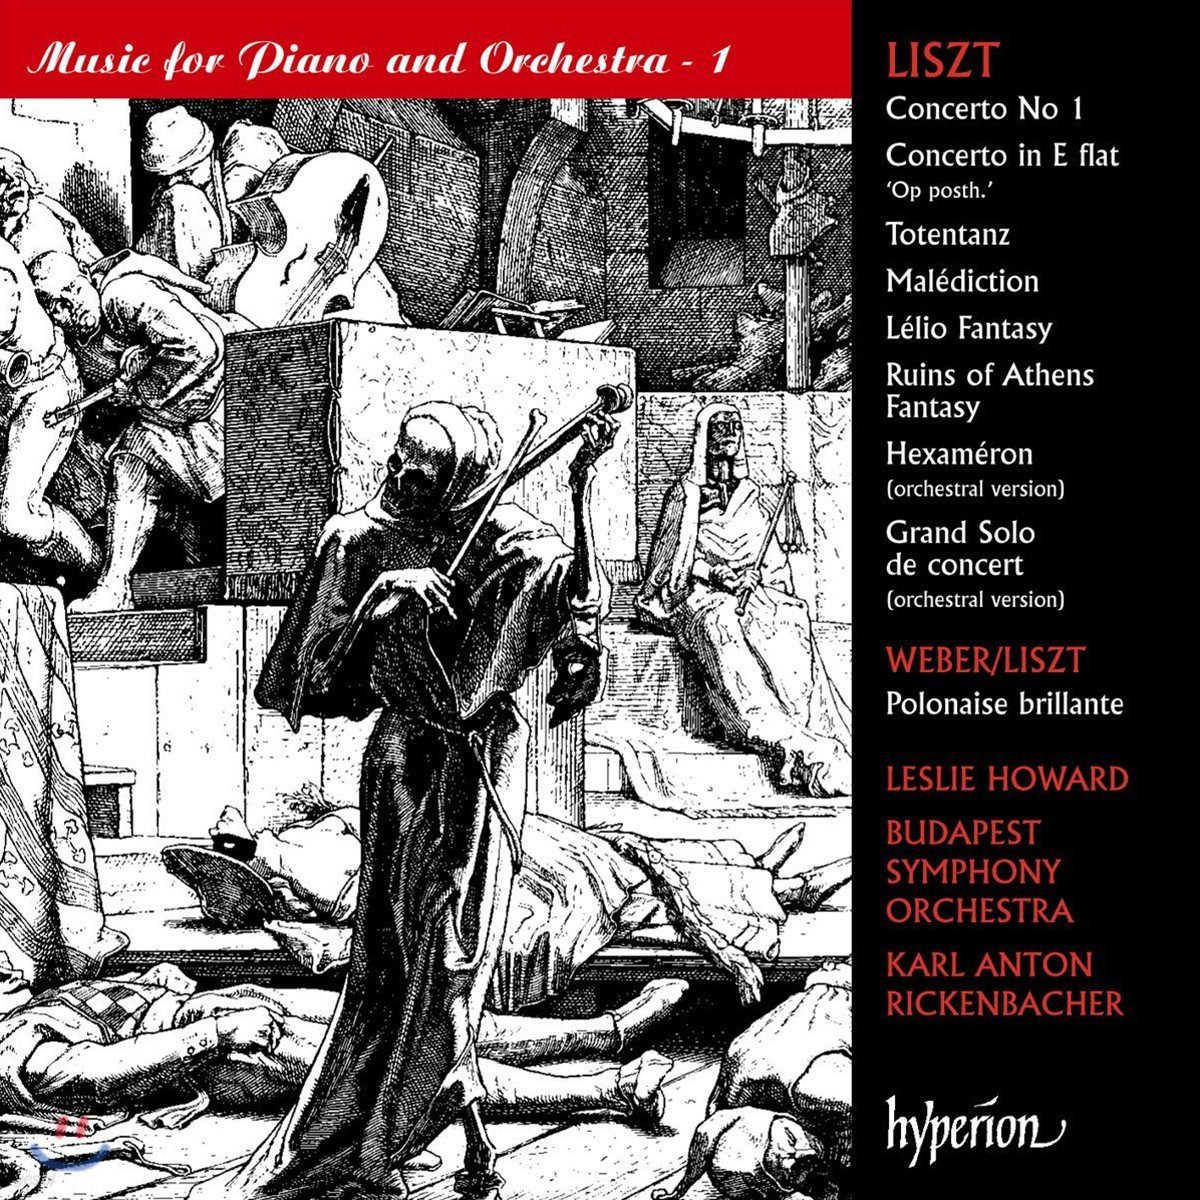 Leslie Howard 리스트: 피아노와 관현악을 위한 음악 1집 - 레슬리 하워드 (Liszt Complete Music for Solo Piano 53a: Music for Piano &amp; Orchestra 1)